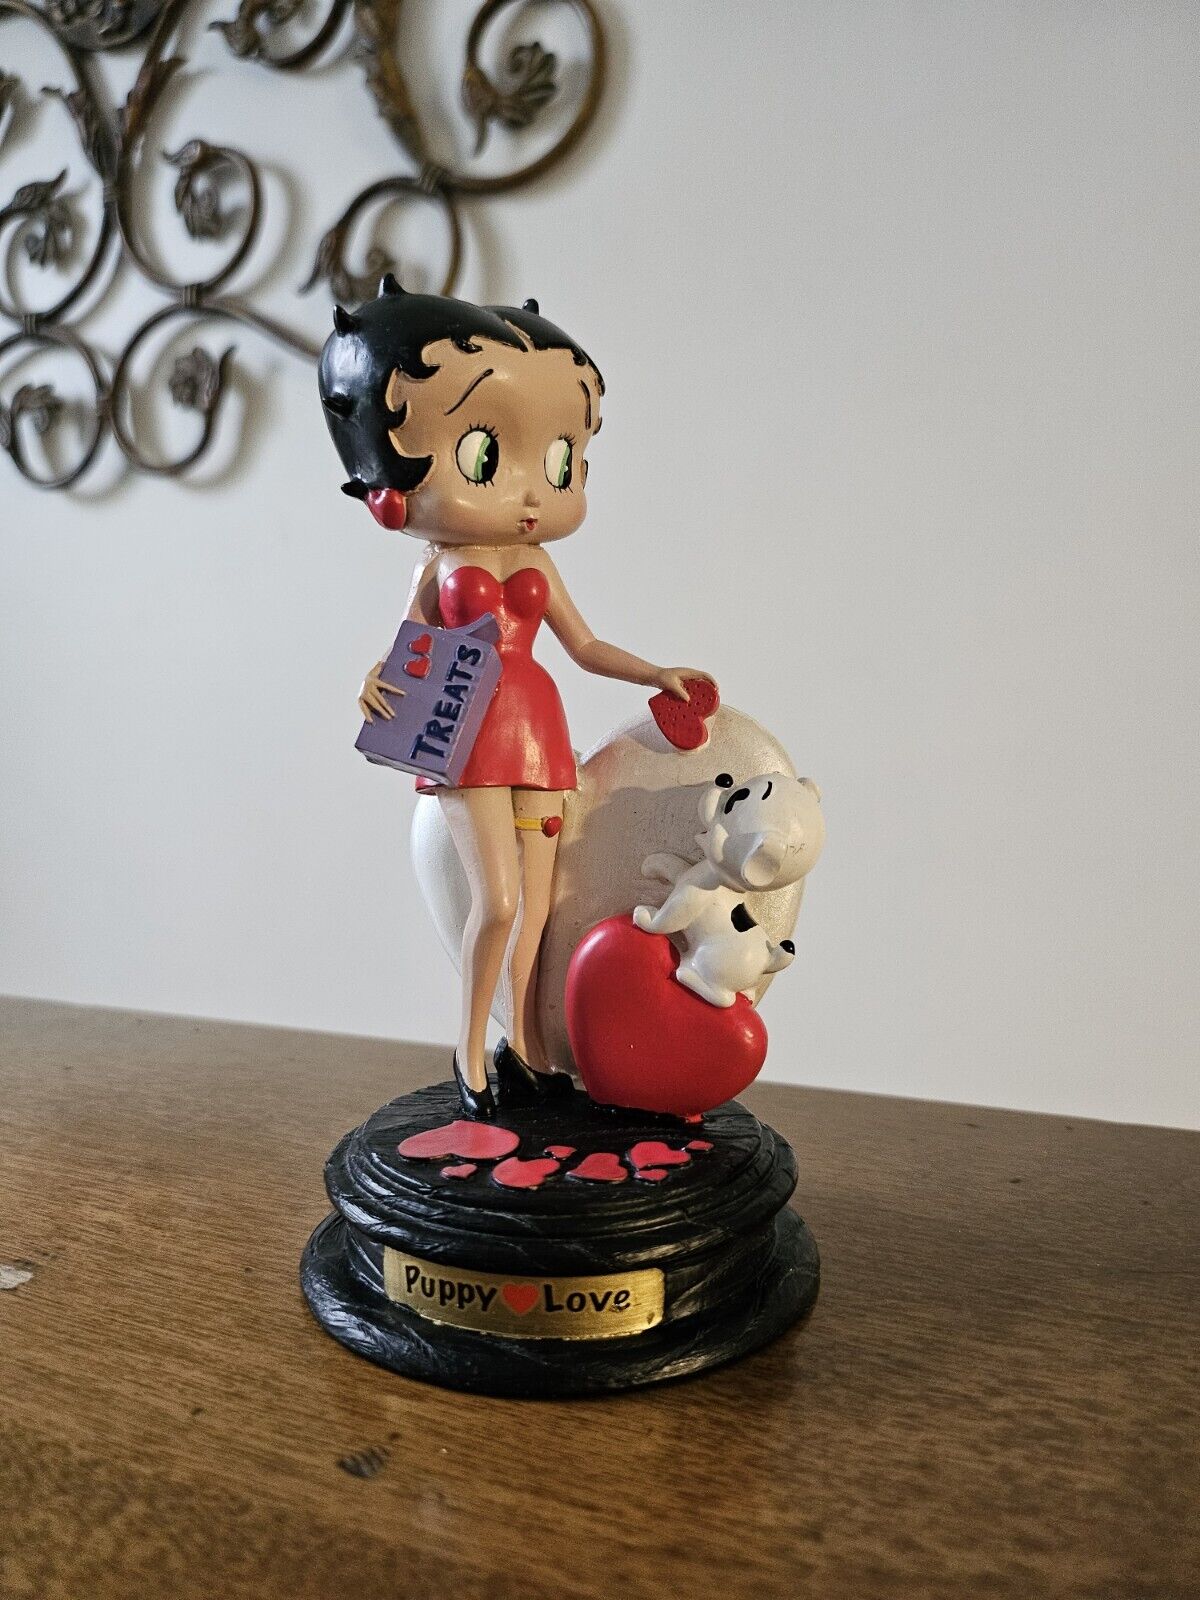 Betty Boop NJ Croce Collection Puppy Love Figurine Dog Pudgy